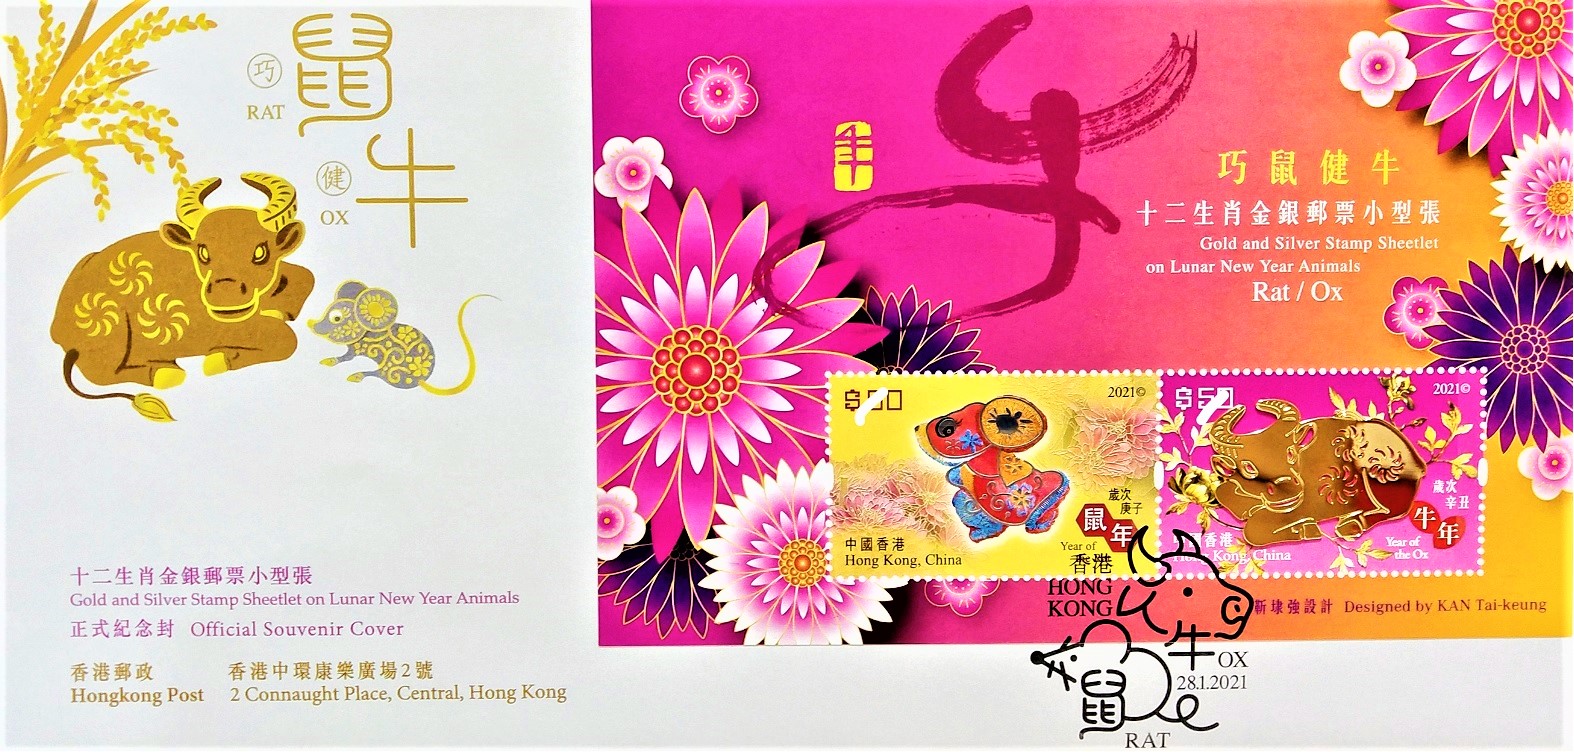 The official souvenir cover of Hong Kong Post's Gold and Silver Stamp Sheetlet on Lunar New Year Animals.